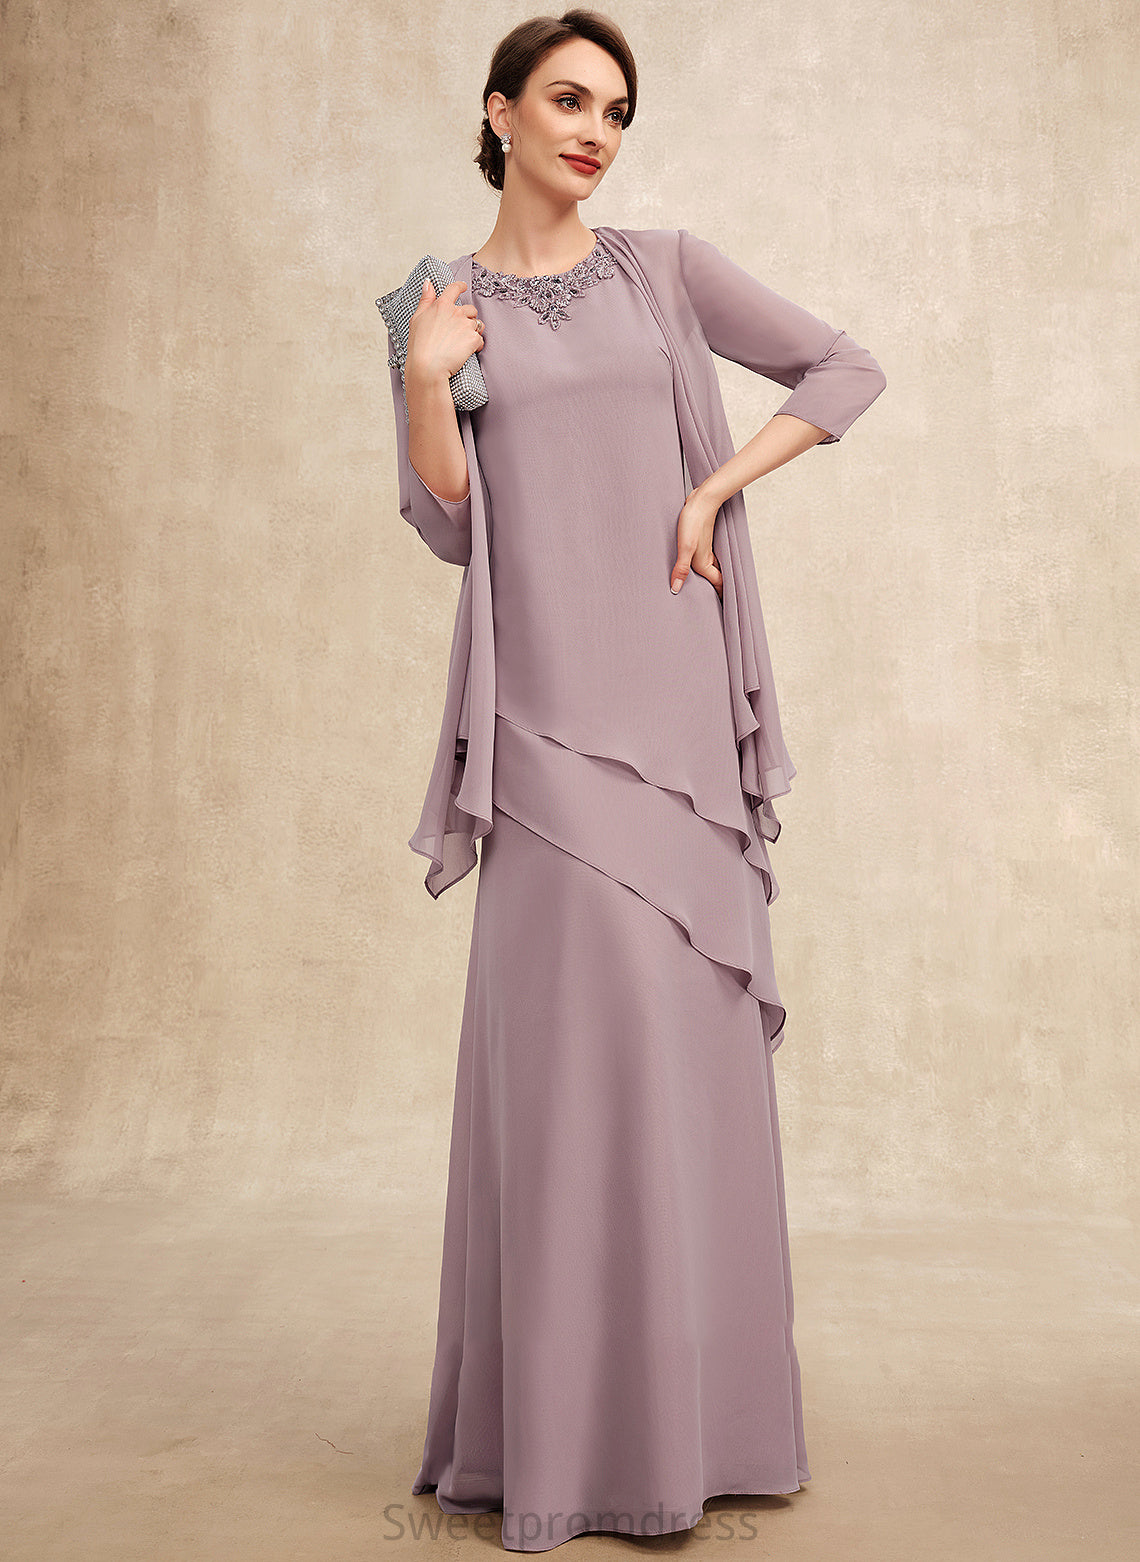 A-Line Dress Scoop Floor-Length With Beading Hana Mother of the Bride Dresses Neck Bride Chiffon of Mother the